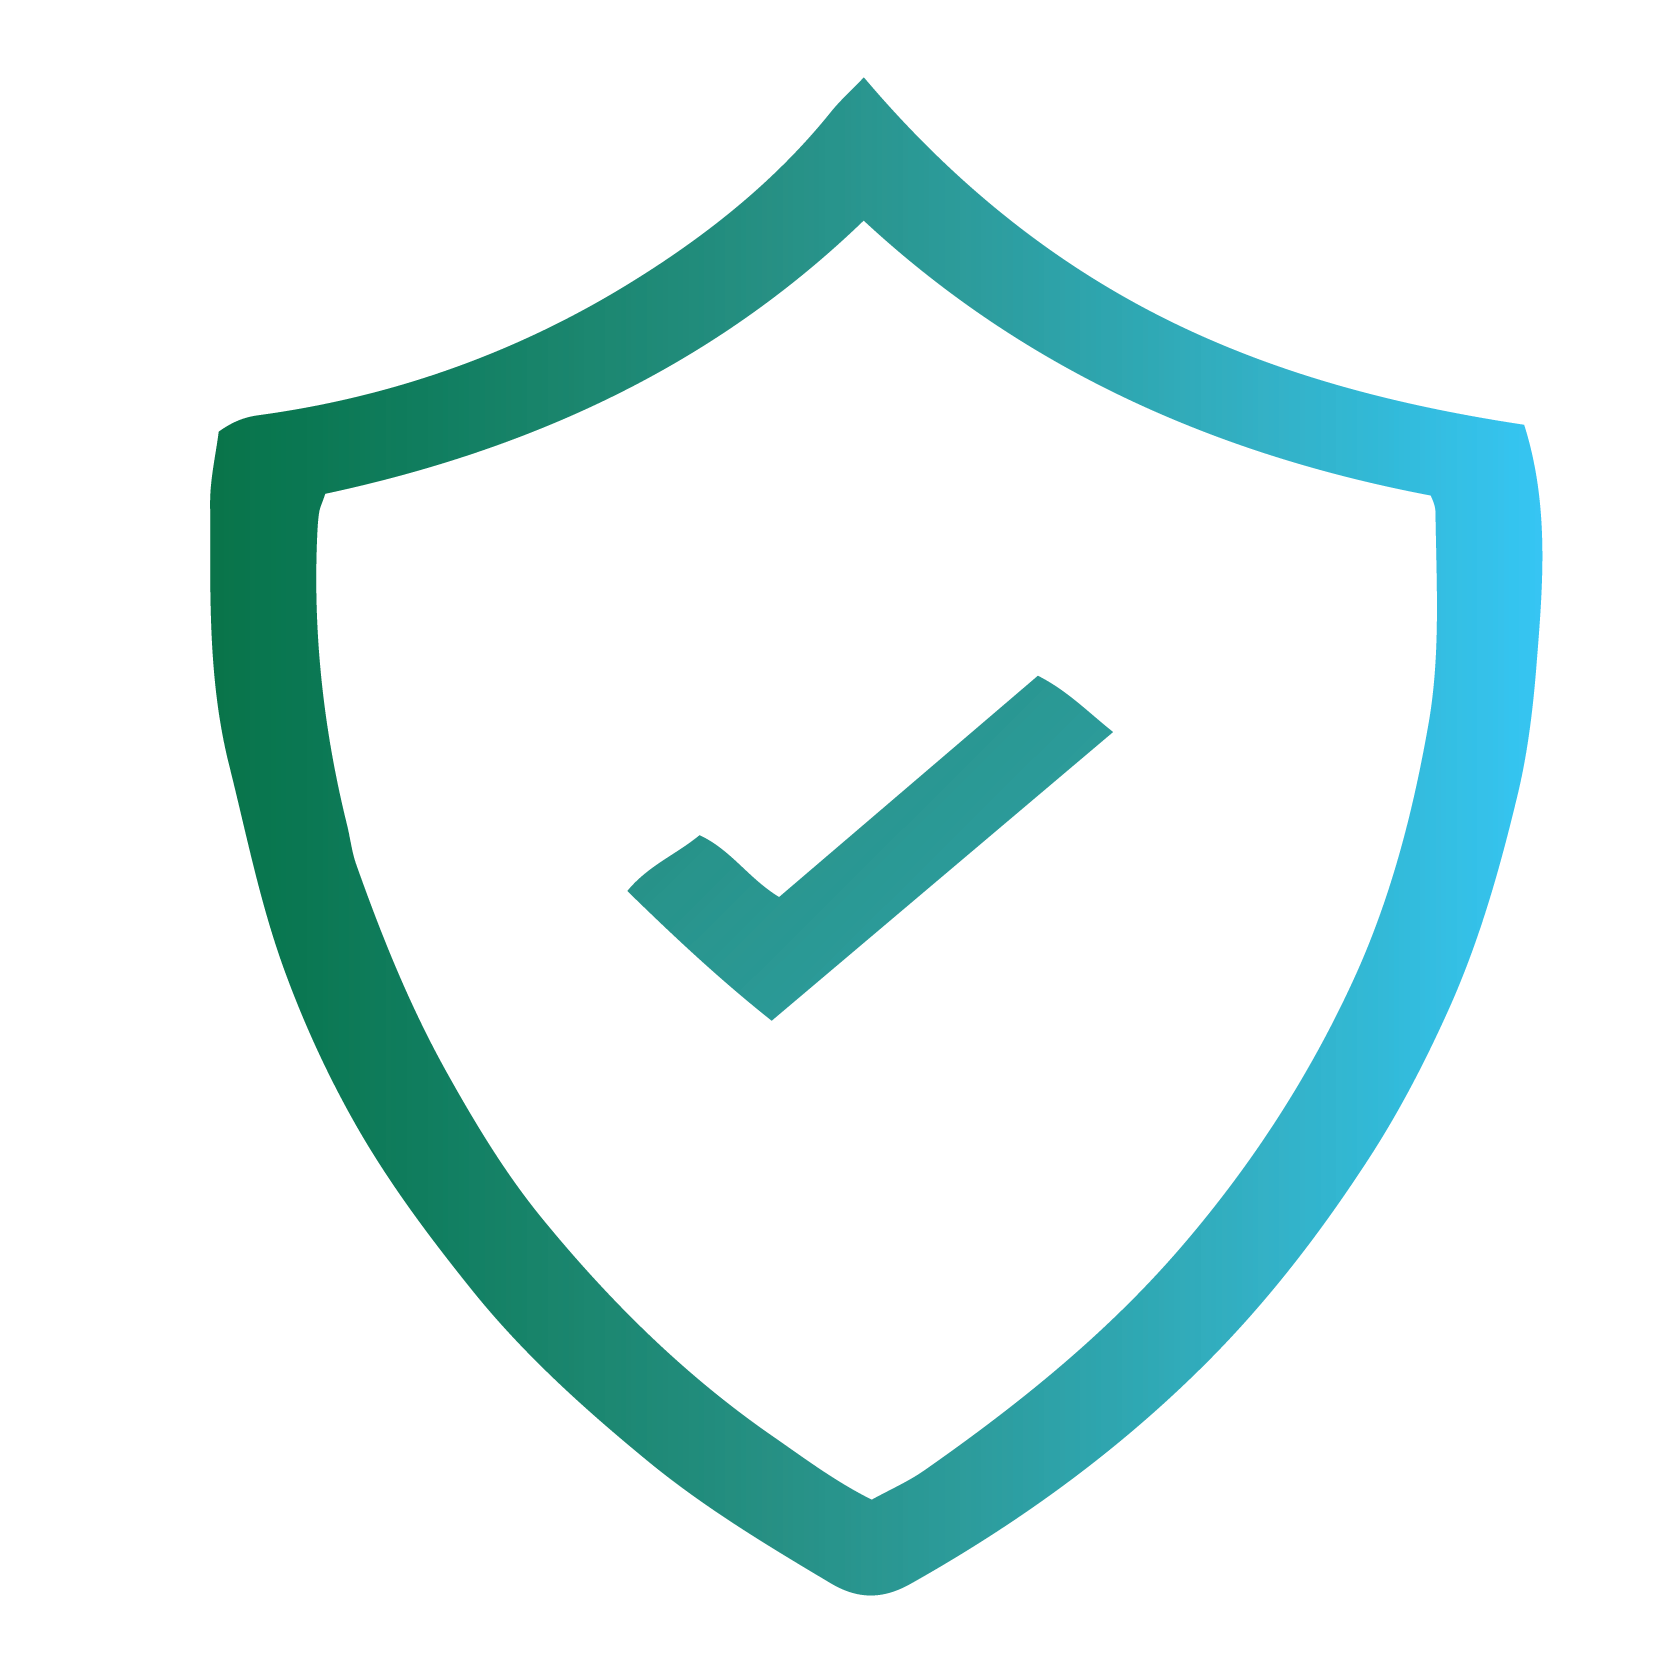 Secure device icon